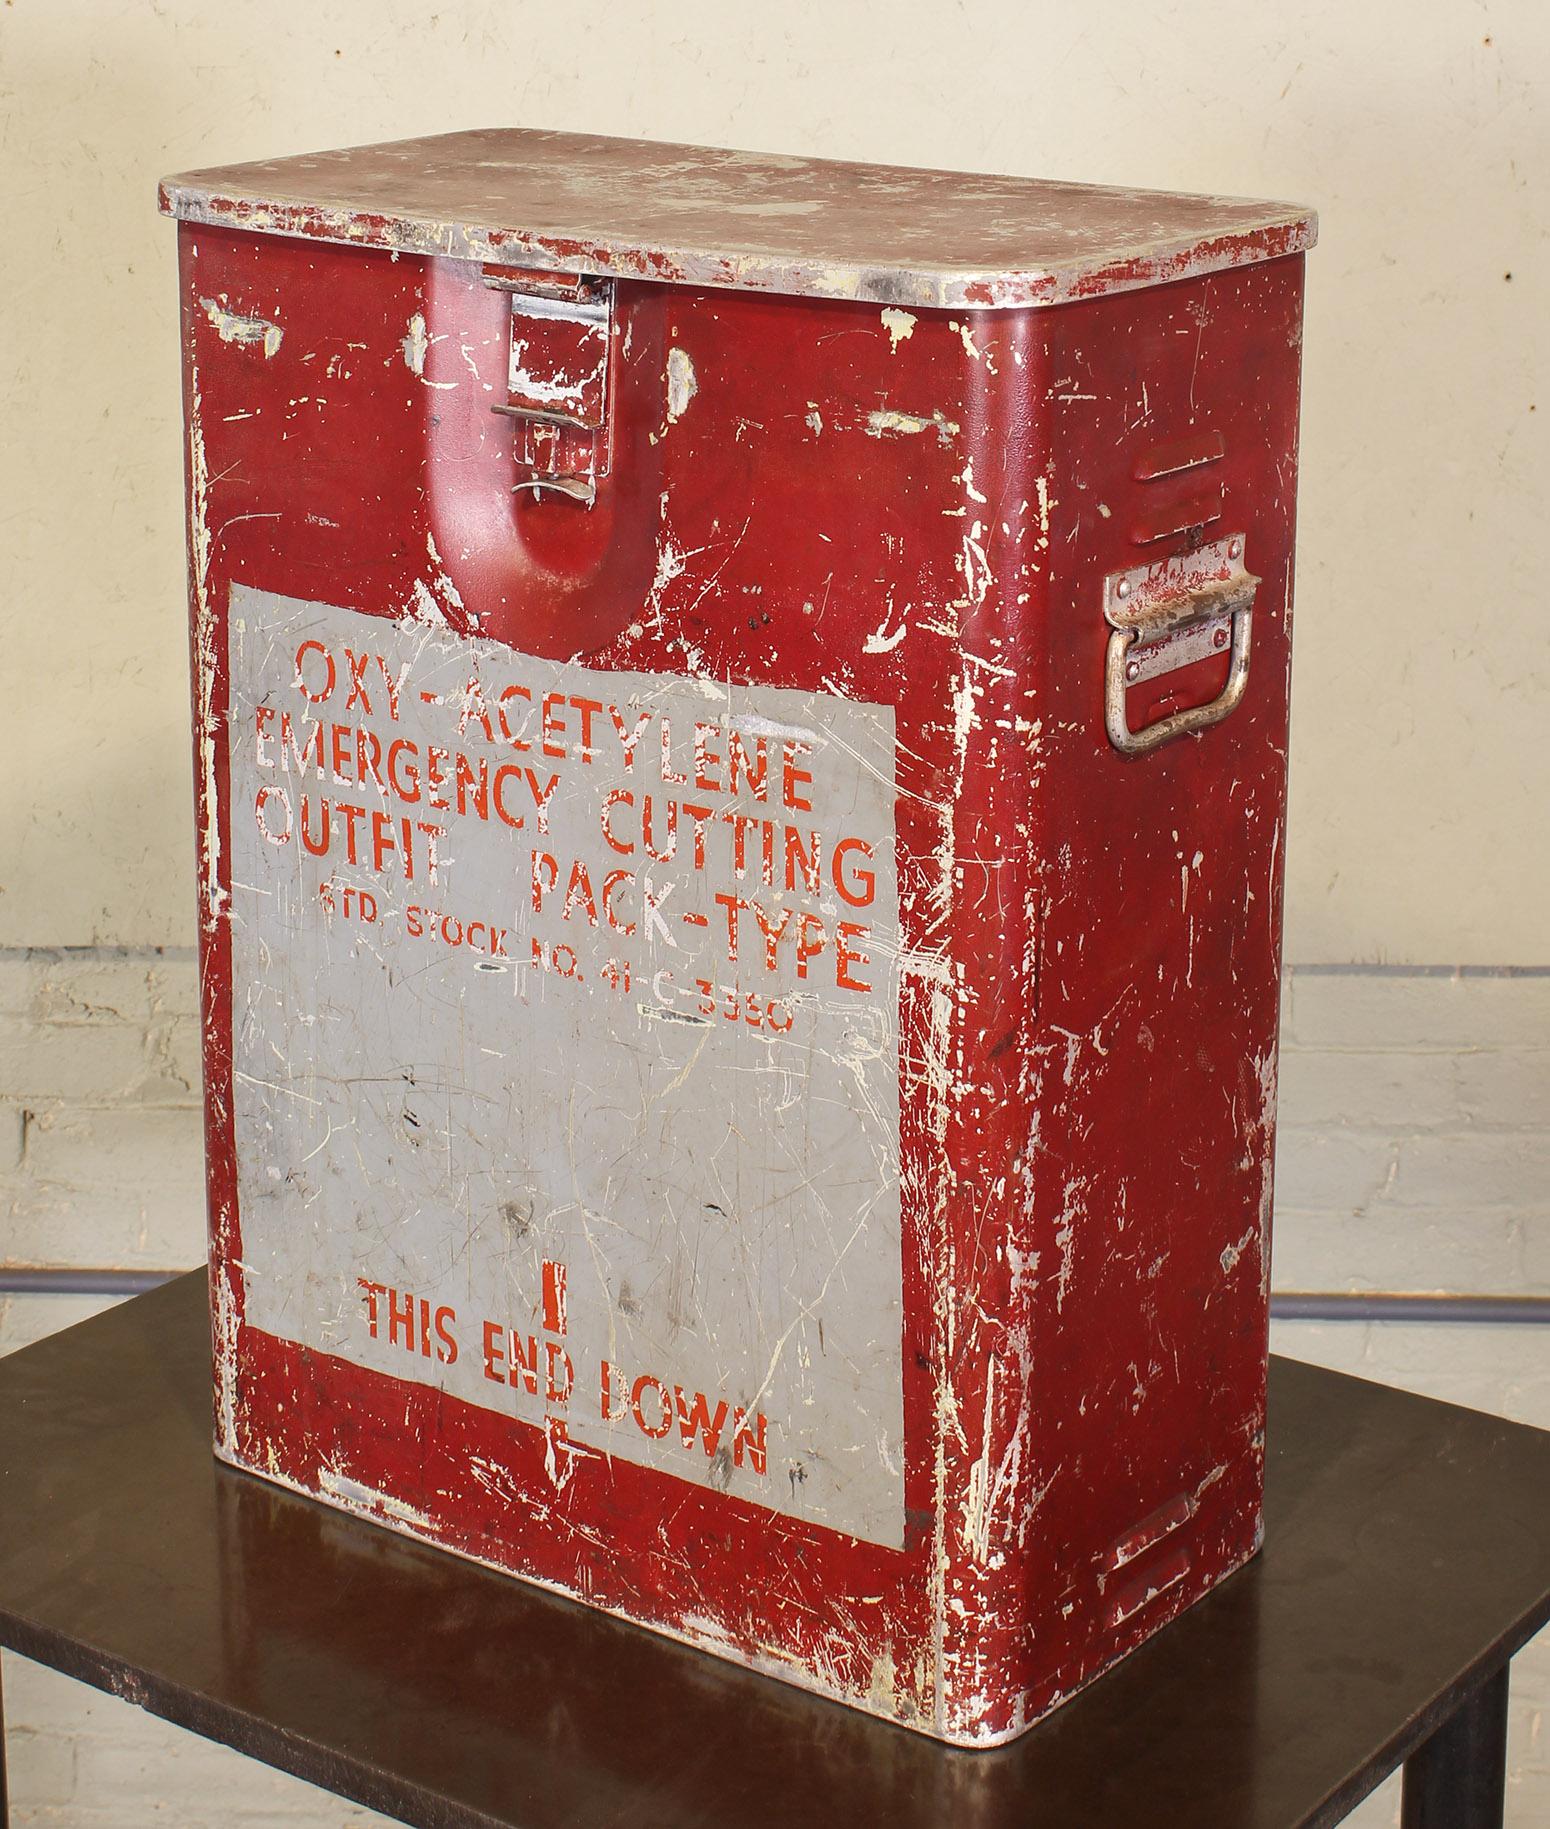 WWII era vintage military - Navy oxy-acetylene emergency cutting outfit metal box / storage container. This would have been on an aircraft carrier during the 1940s. Instructions for use are underneath the lid. Overall dimensions are 18 1/2